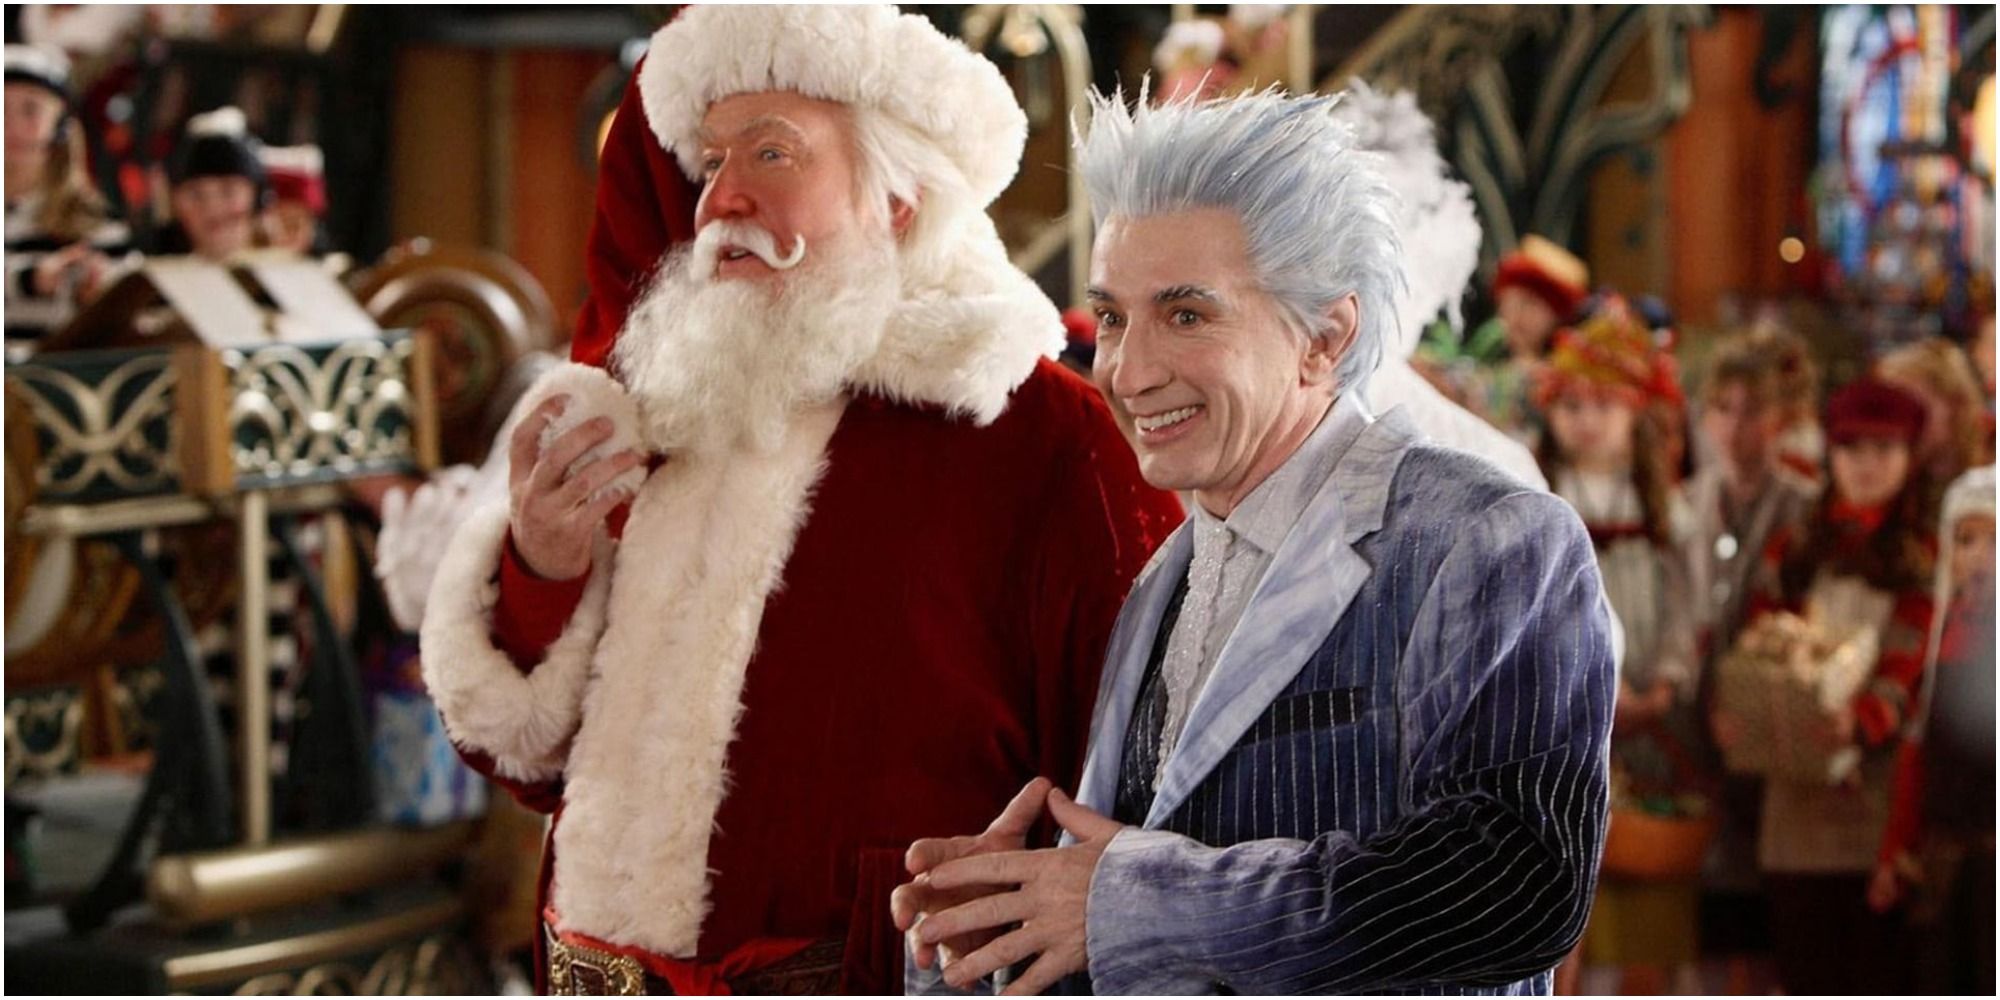 Santa and Jack Frost in the North Pole in The Santa Clause 3